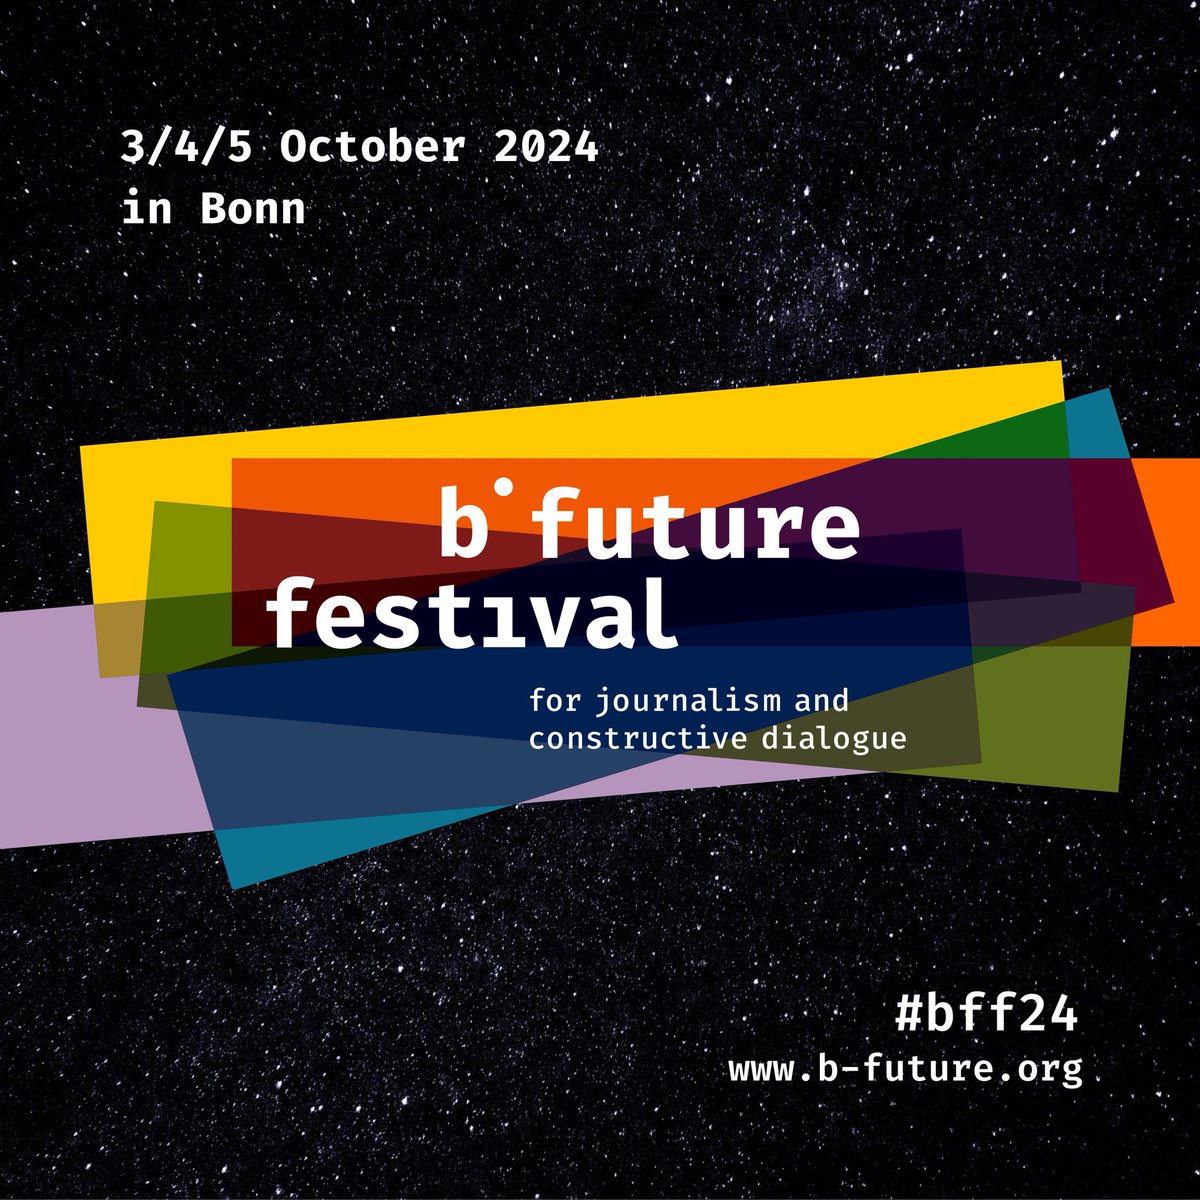 🤩SAVE THE DATE for the second round of b° future! We can’t wait to see you all next year. Stay tuned for more details in the upcoming weeks—the journey continues! #bff24 In the meantime, explore our captivating panels and more from #bff23 here: youtube.com/@bfuturefestiv…